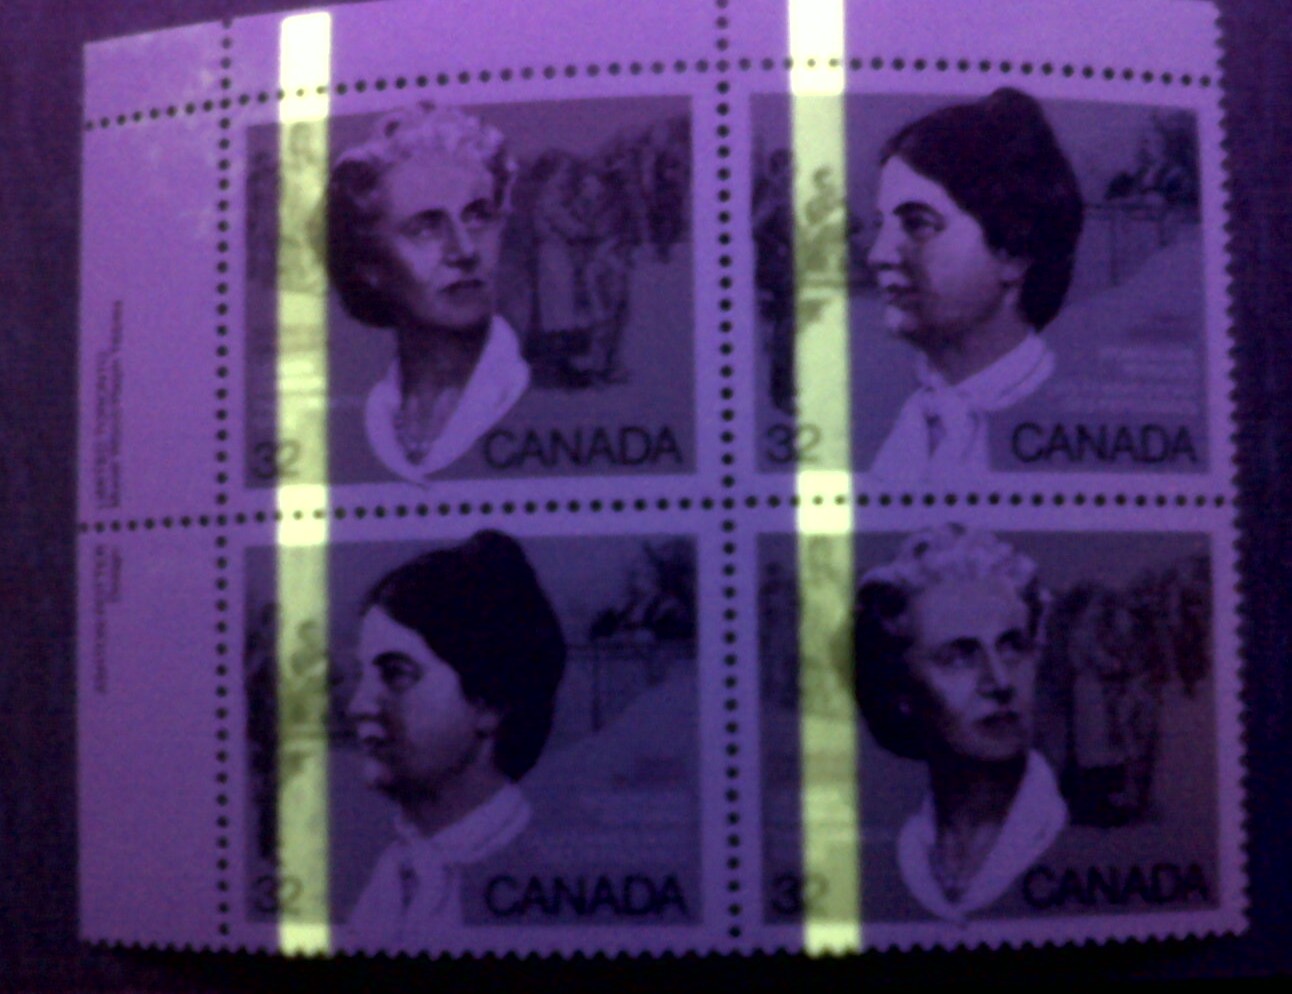 Canada 32 cent Canadian Feminists Plate block of 4, Mint Never Hinged showing major TAG SHIFT - Rose G1a